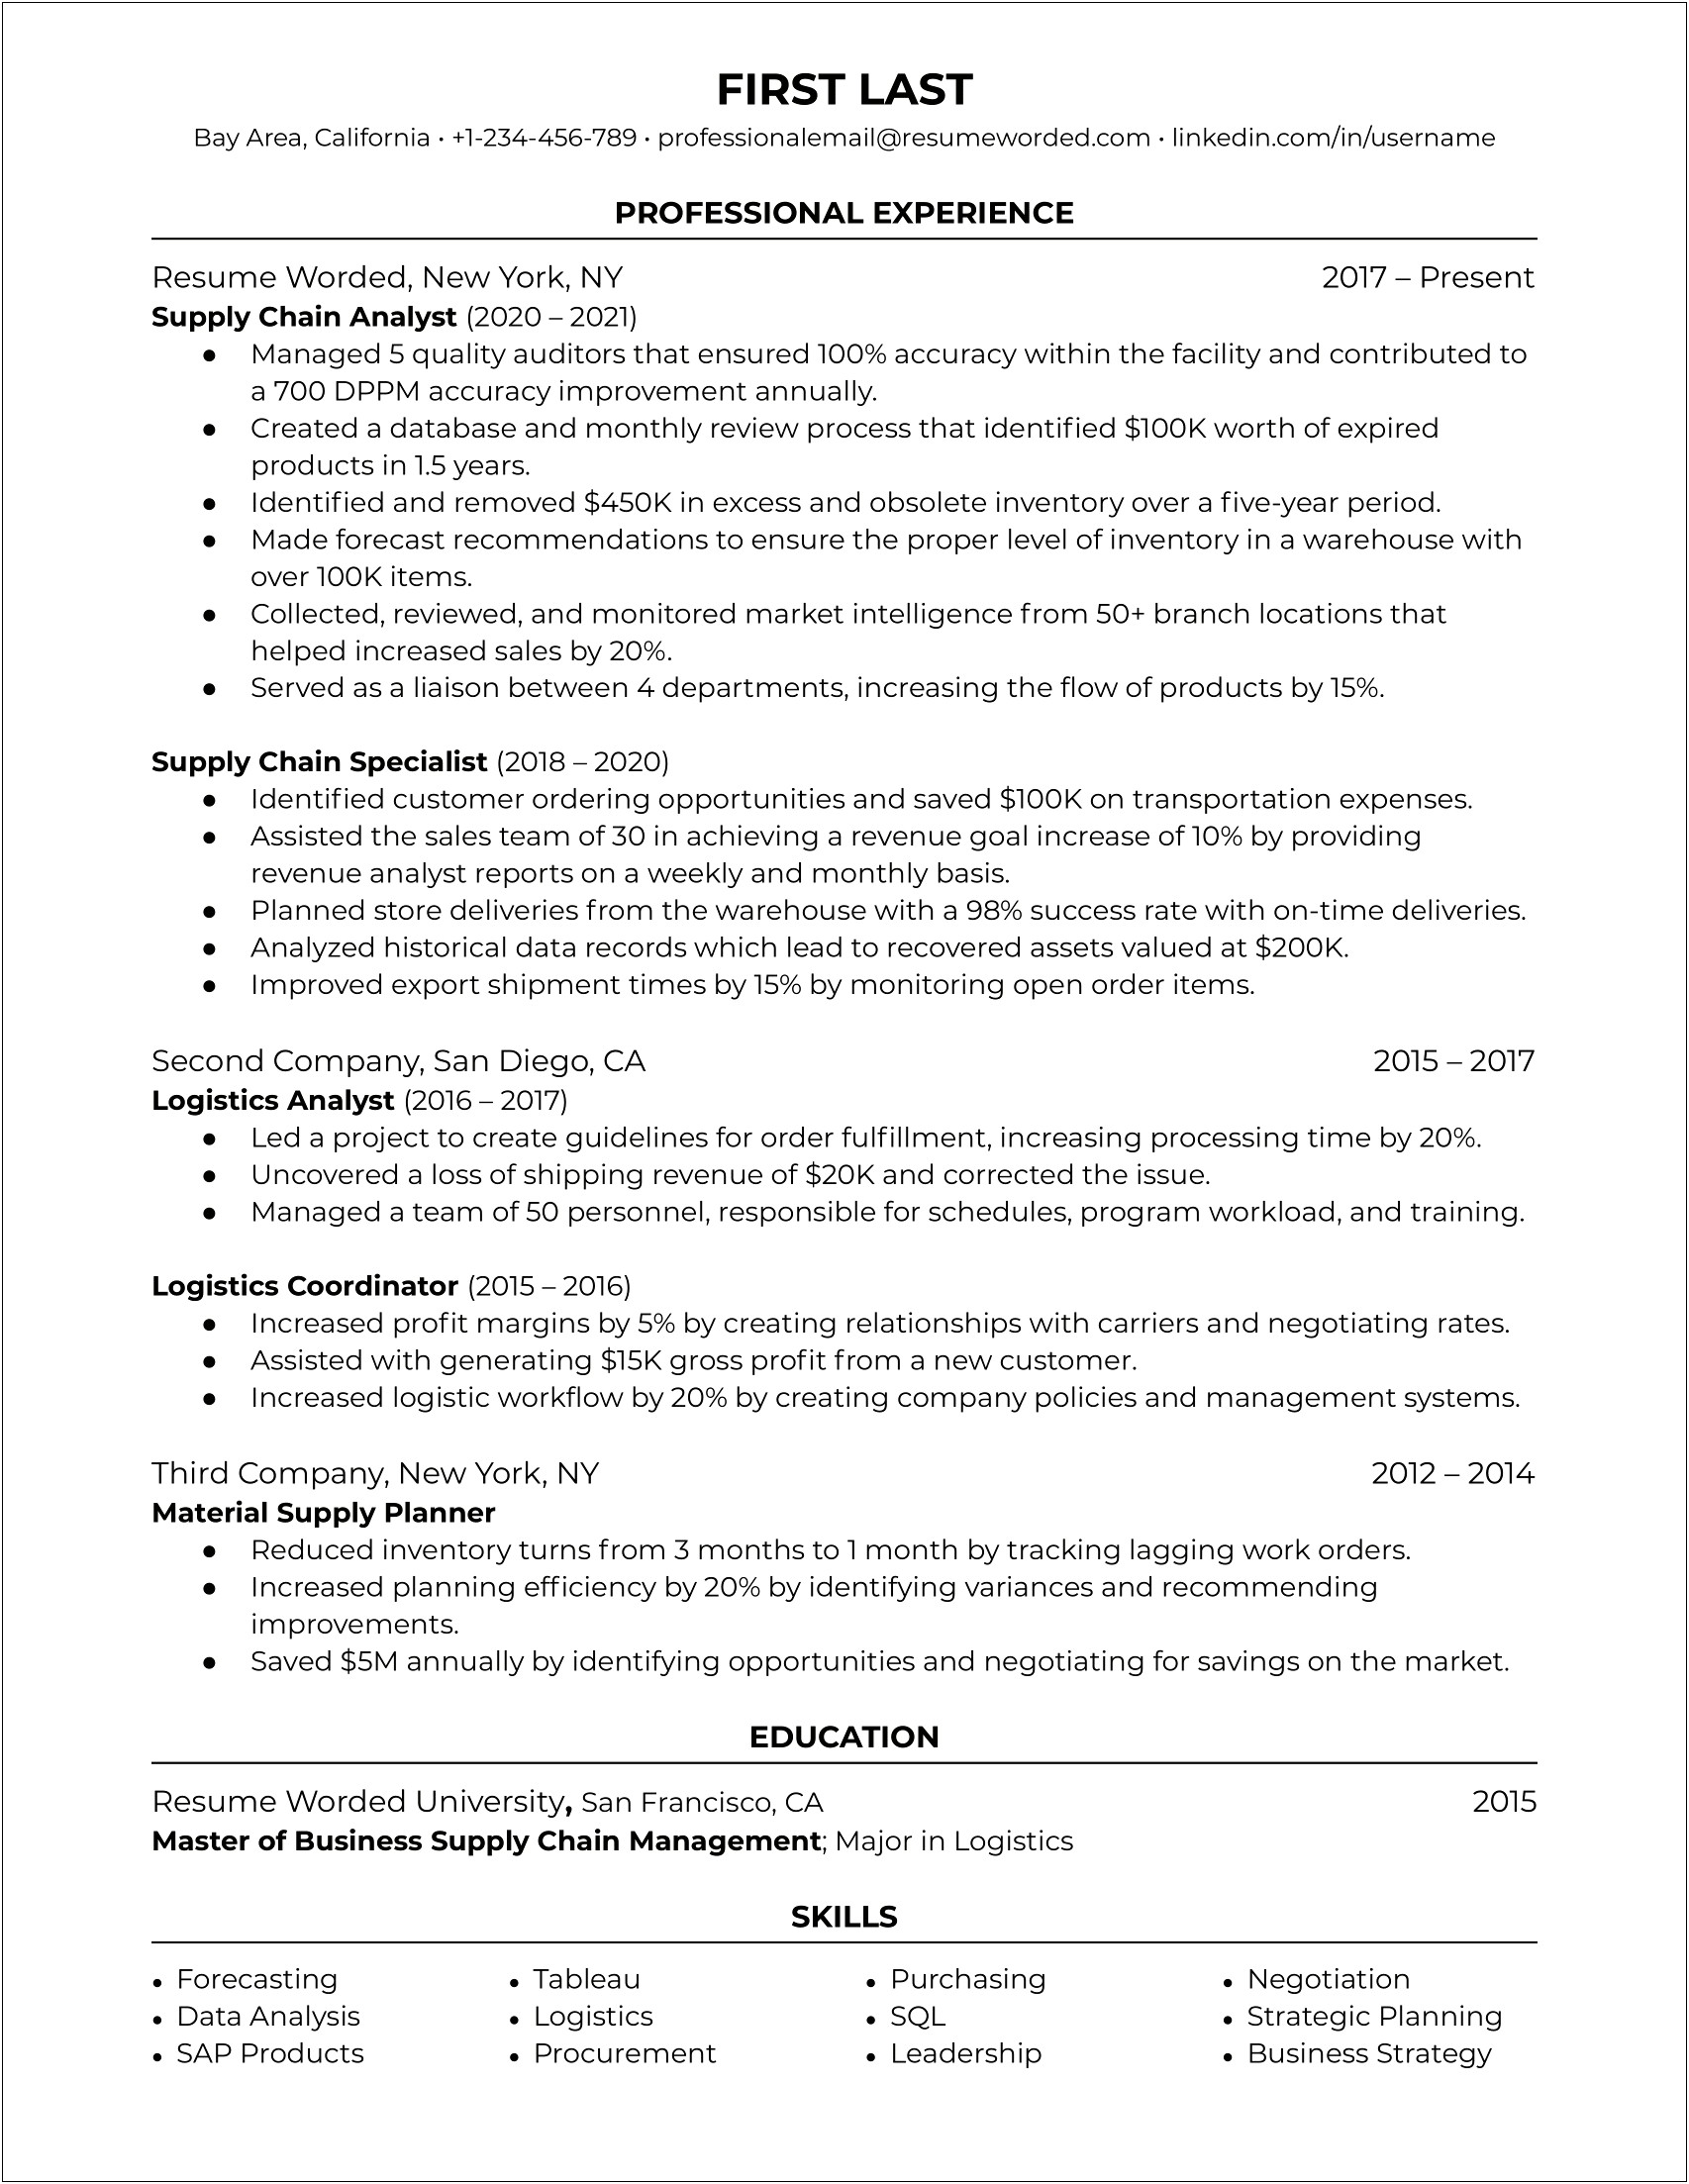 Professional Summary In Resume For Experienced Logistics Manager